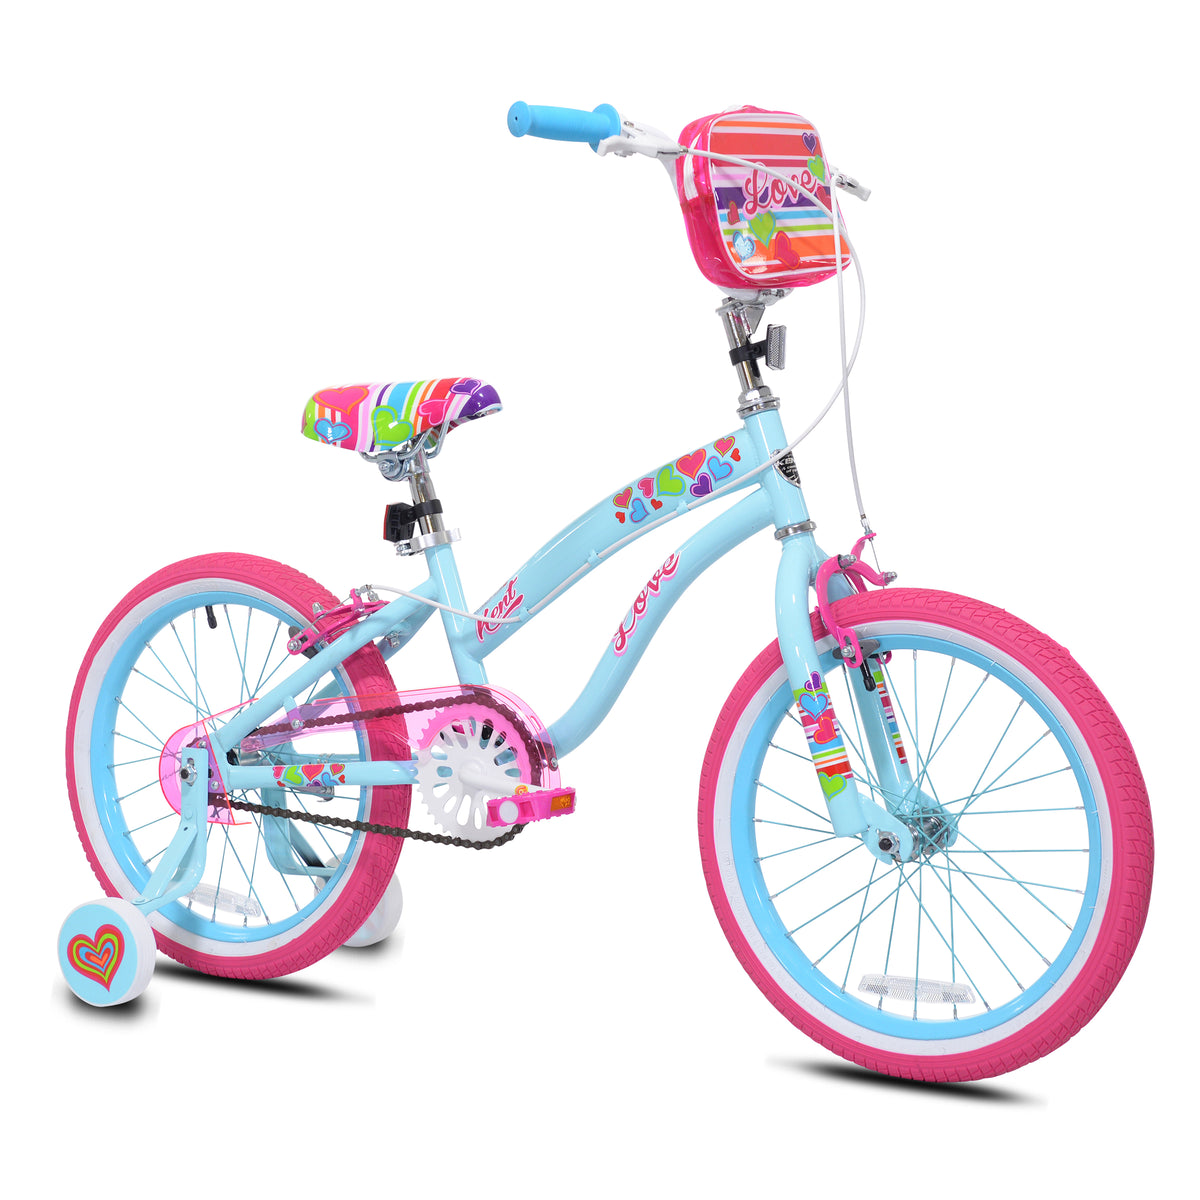 18" Kent Love | Bike for Kids Ages 5-8